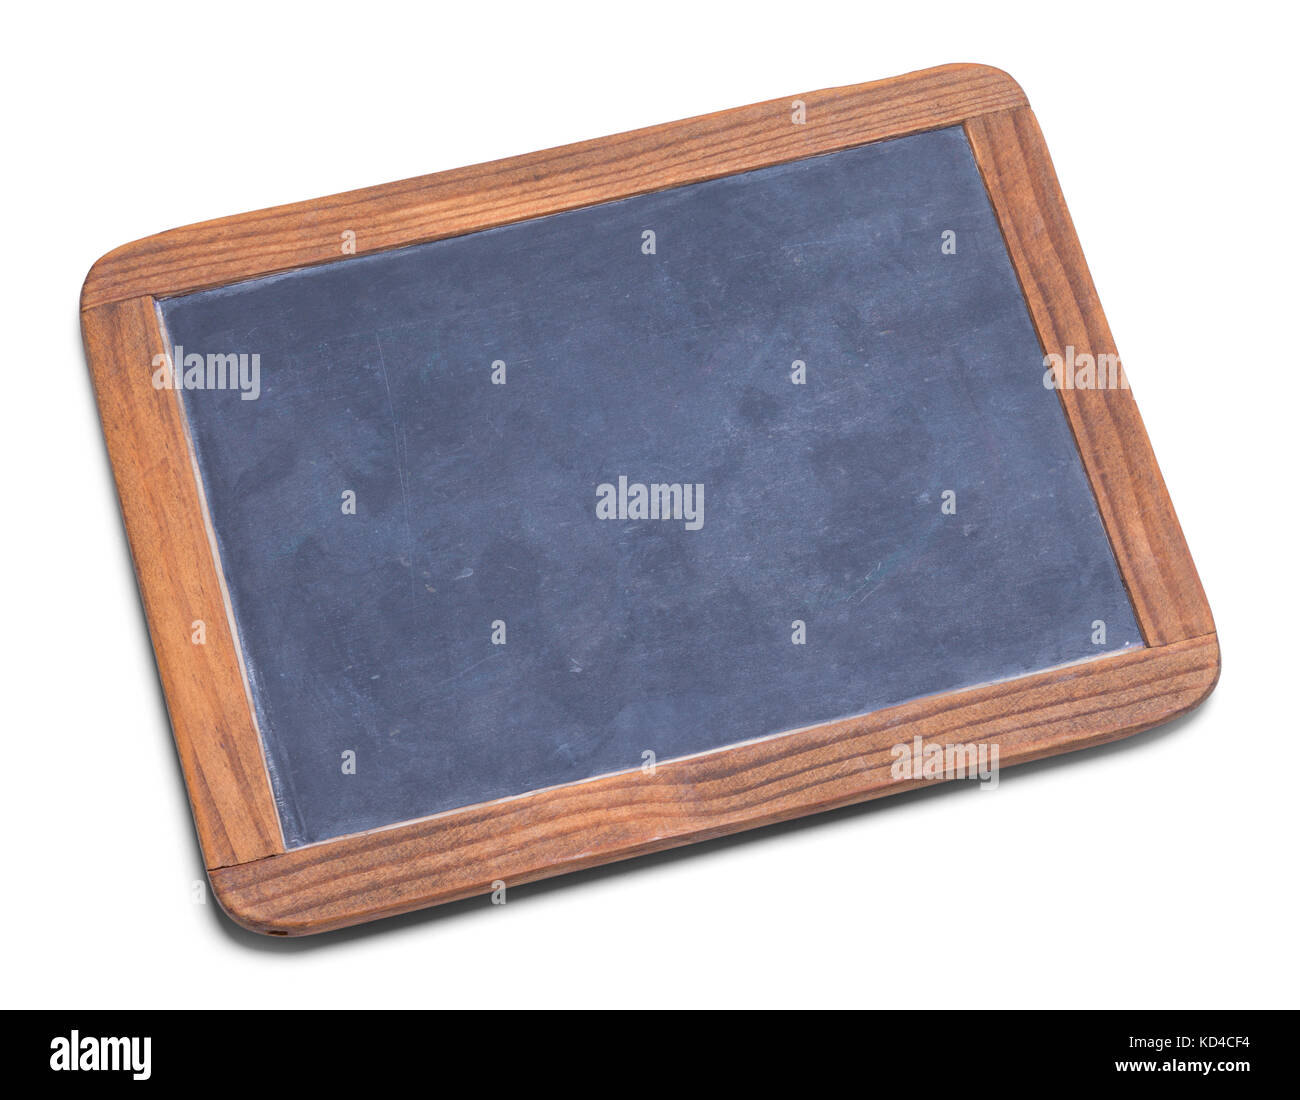 School Slate Chalk Board Isolated on a White Background. Stock Photo